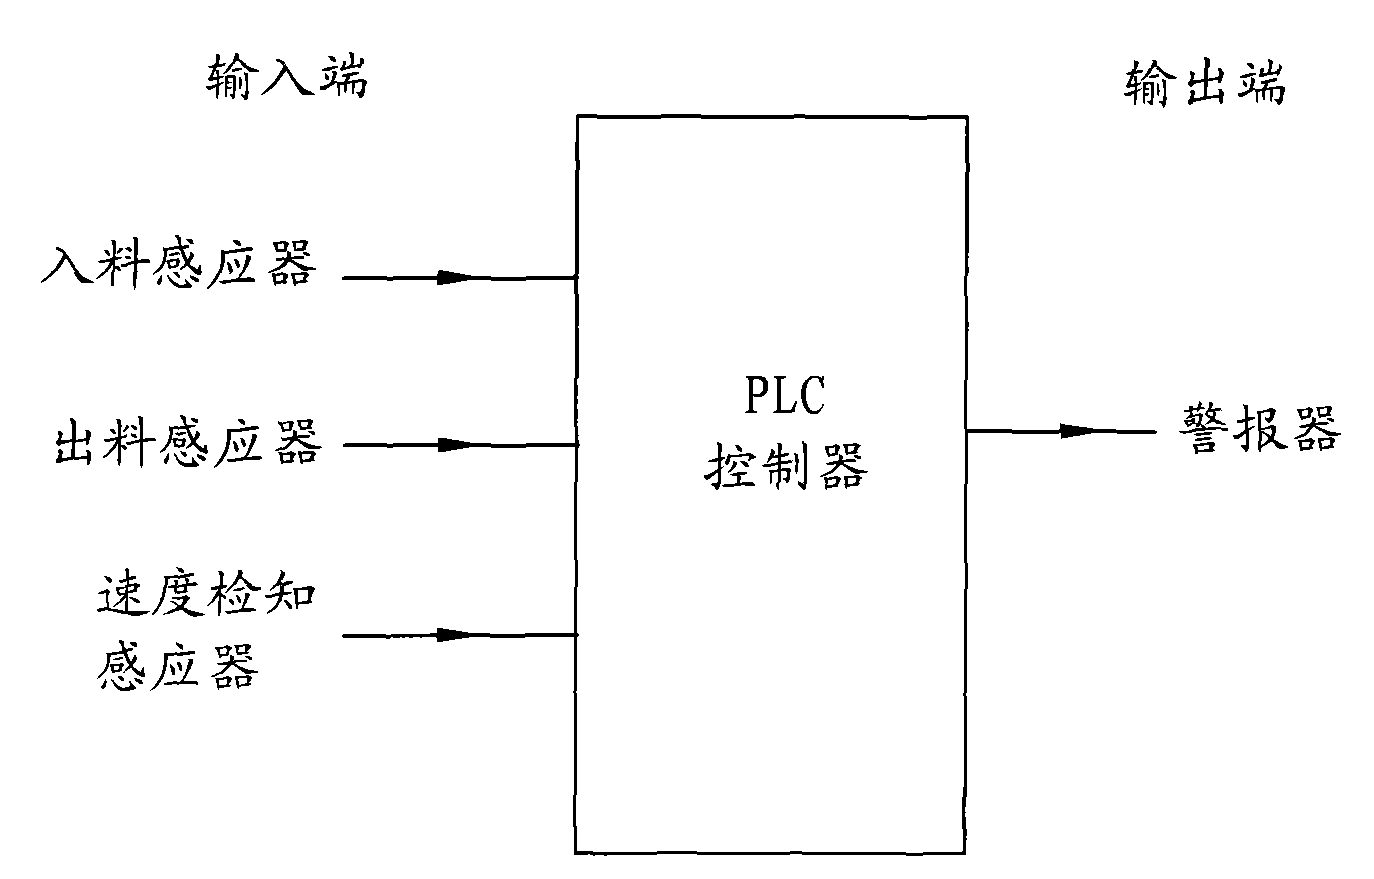 Detection method of plate clamping for PCB (Printed Circuit Board) horizontal line